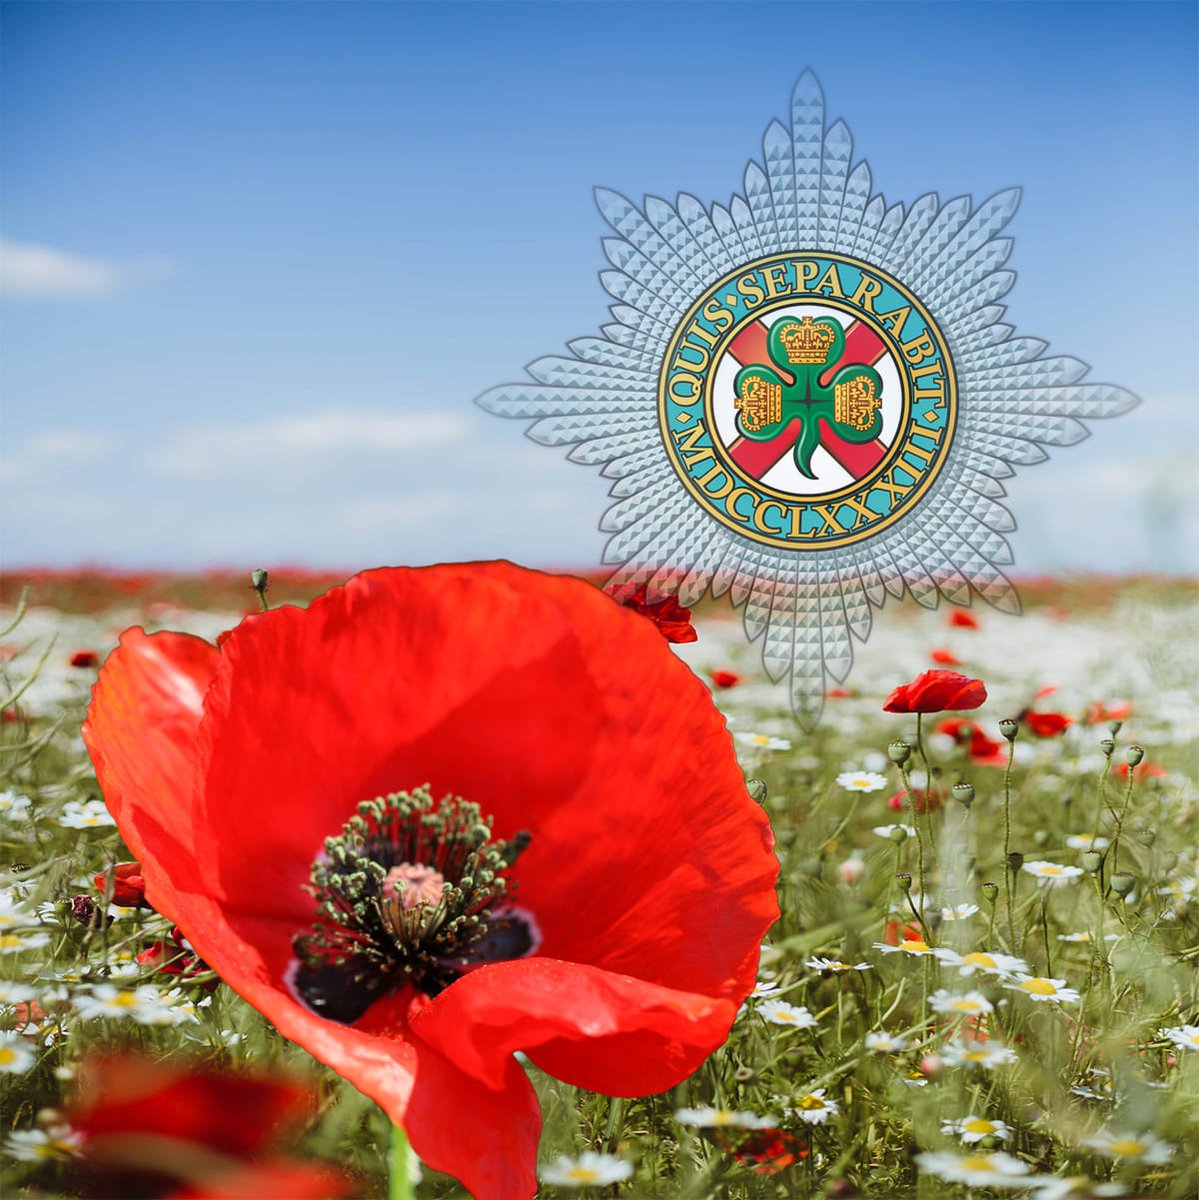 “They shall grow not old, as we that are left grow old: Age shall not weary them, nor the years condemn. At the going down of the sun and in the morning We will remember them.” Remembering all those who have served today. Quis Separabit ☘️ Photo - Crown Copyright